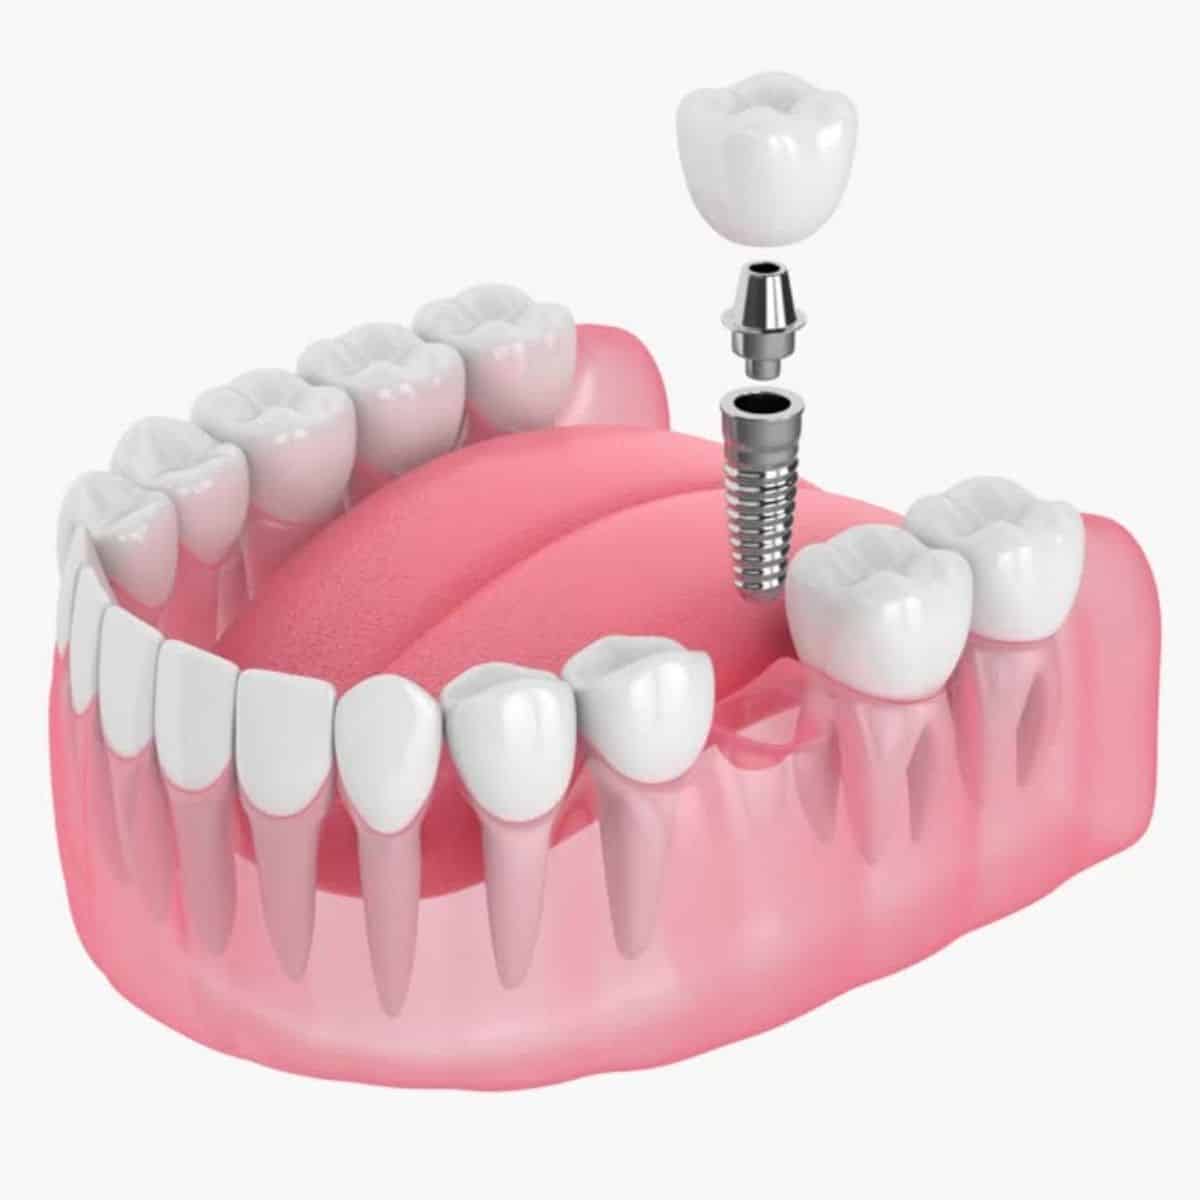 Illustration of dental implant with screw going into mouth